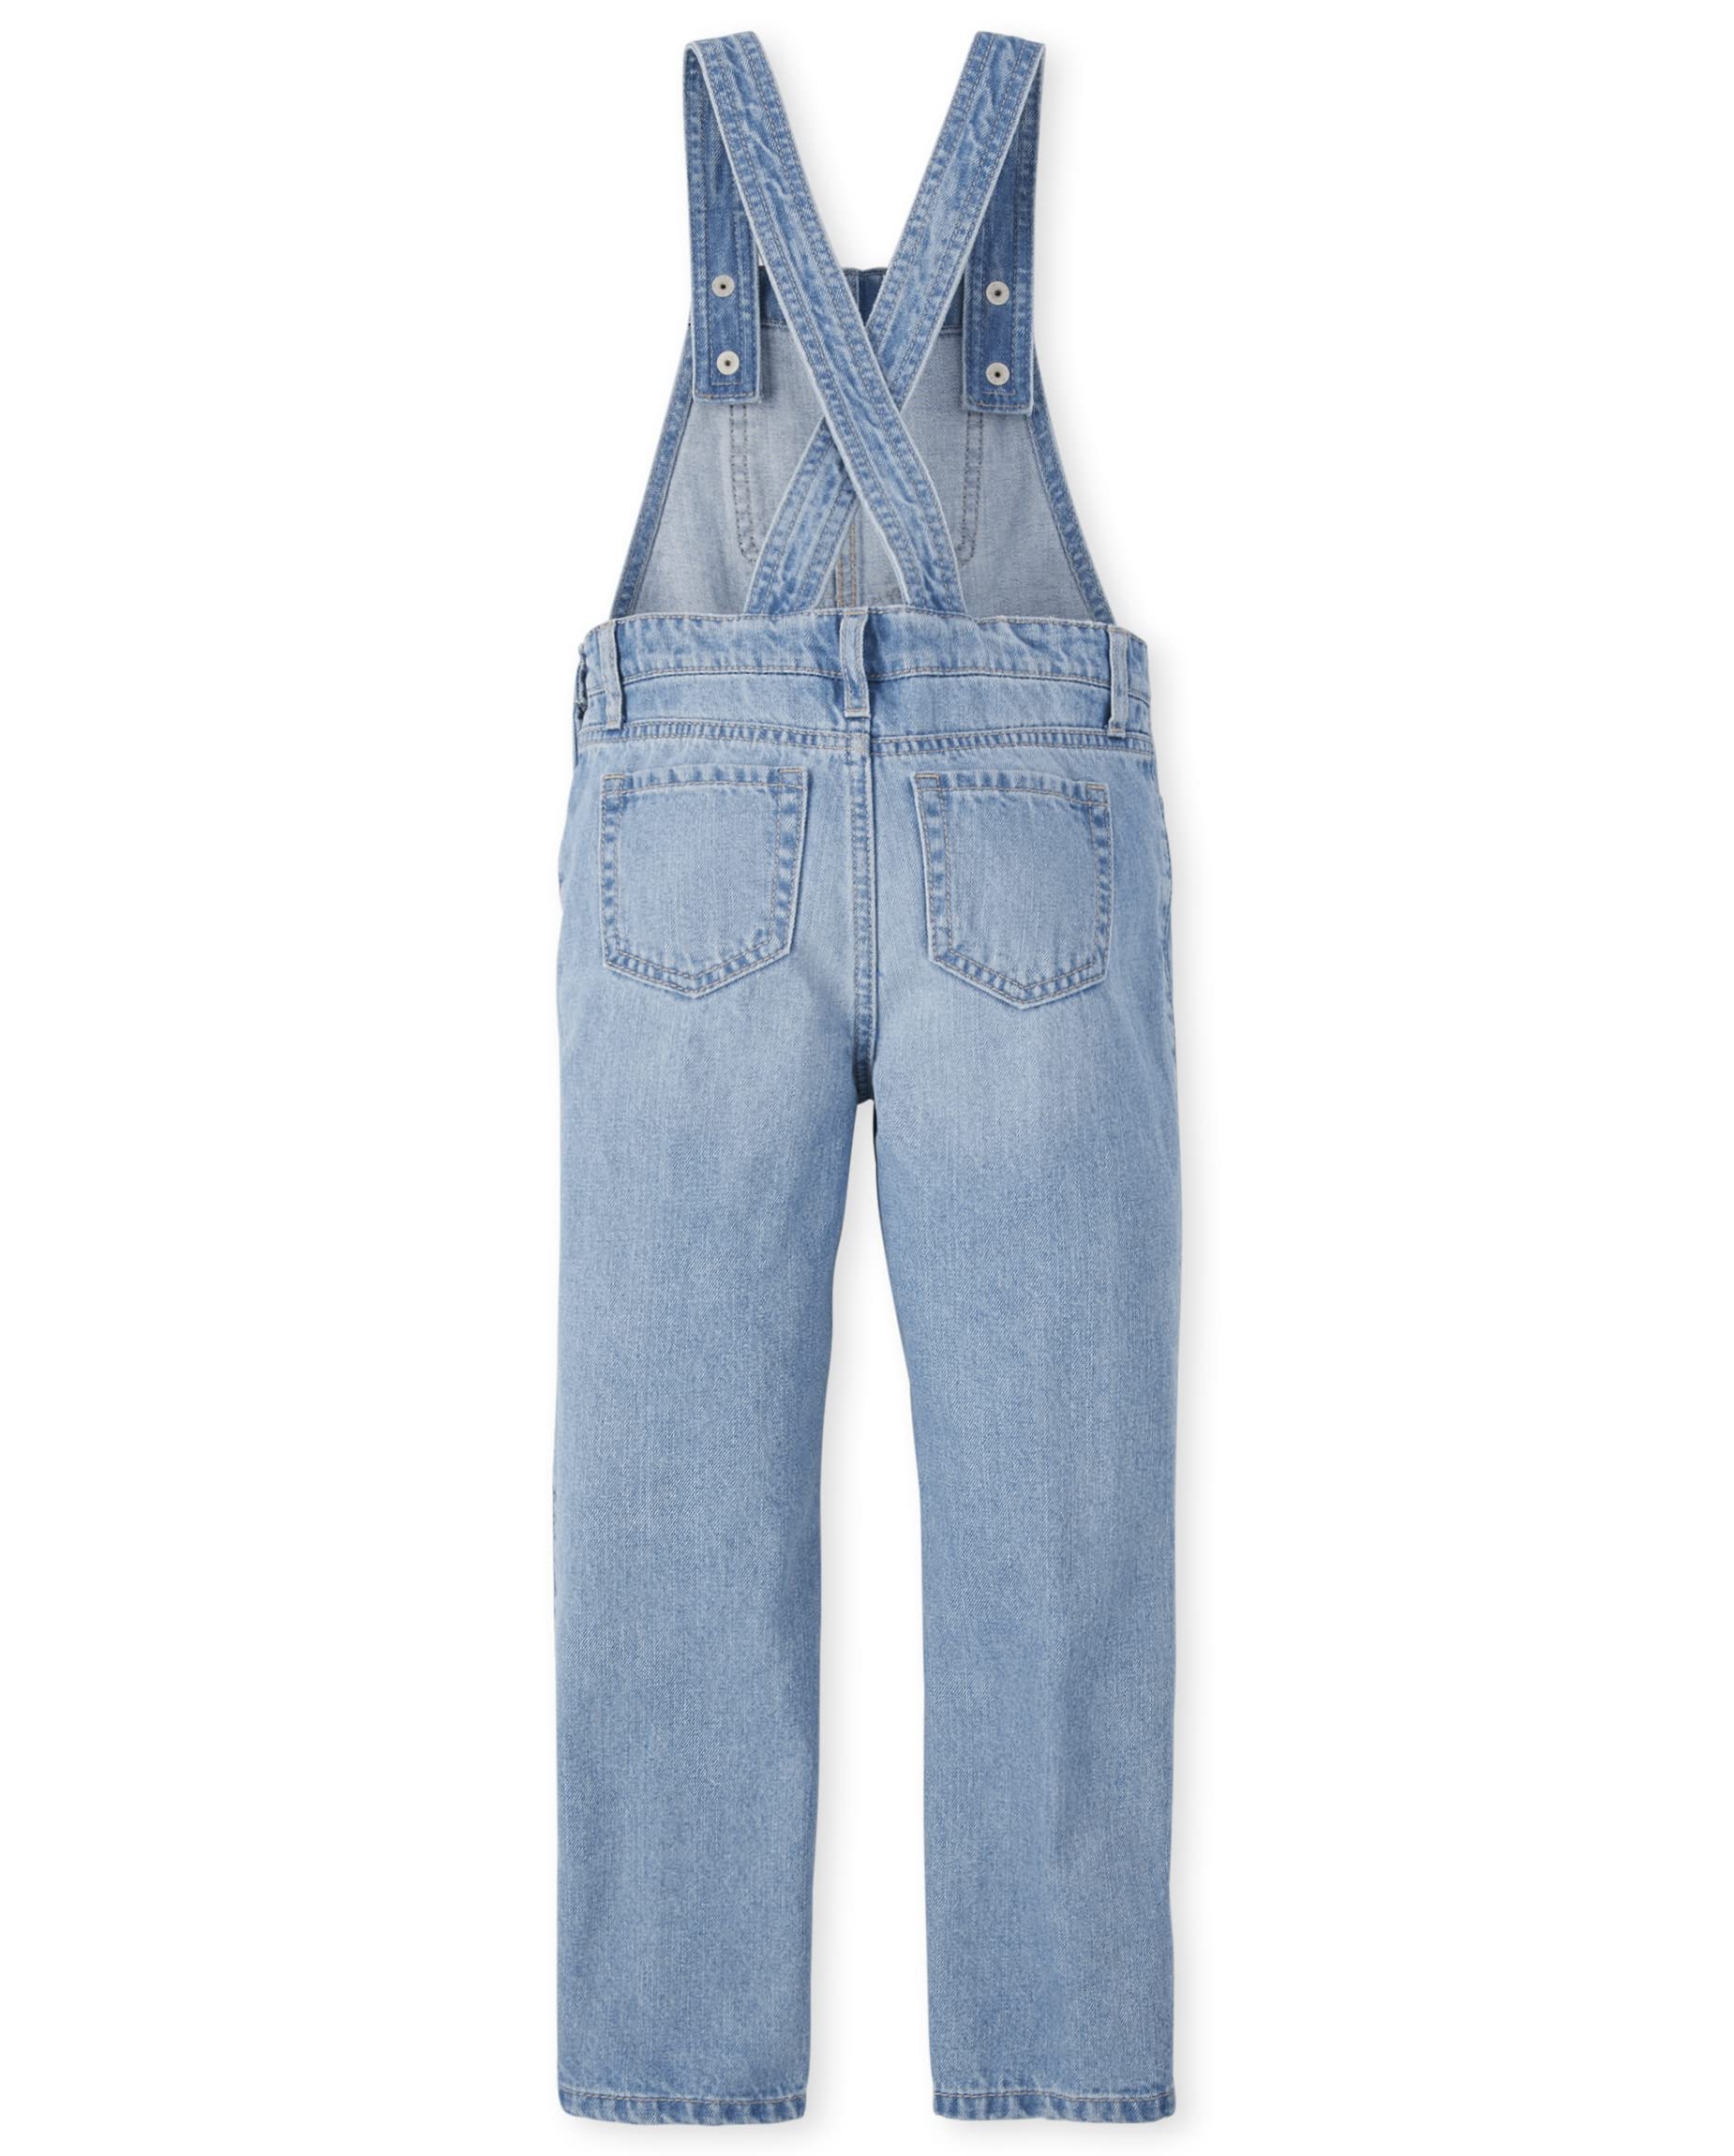 The Children's Place girls Overalls